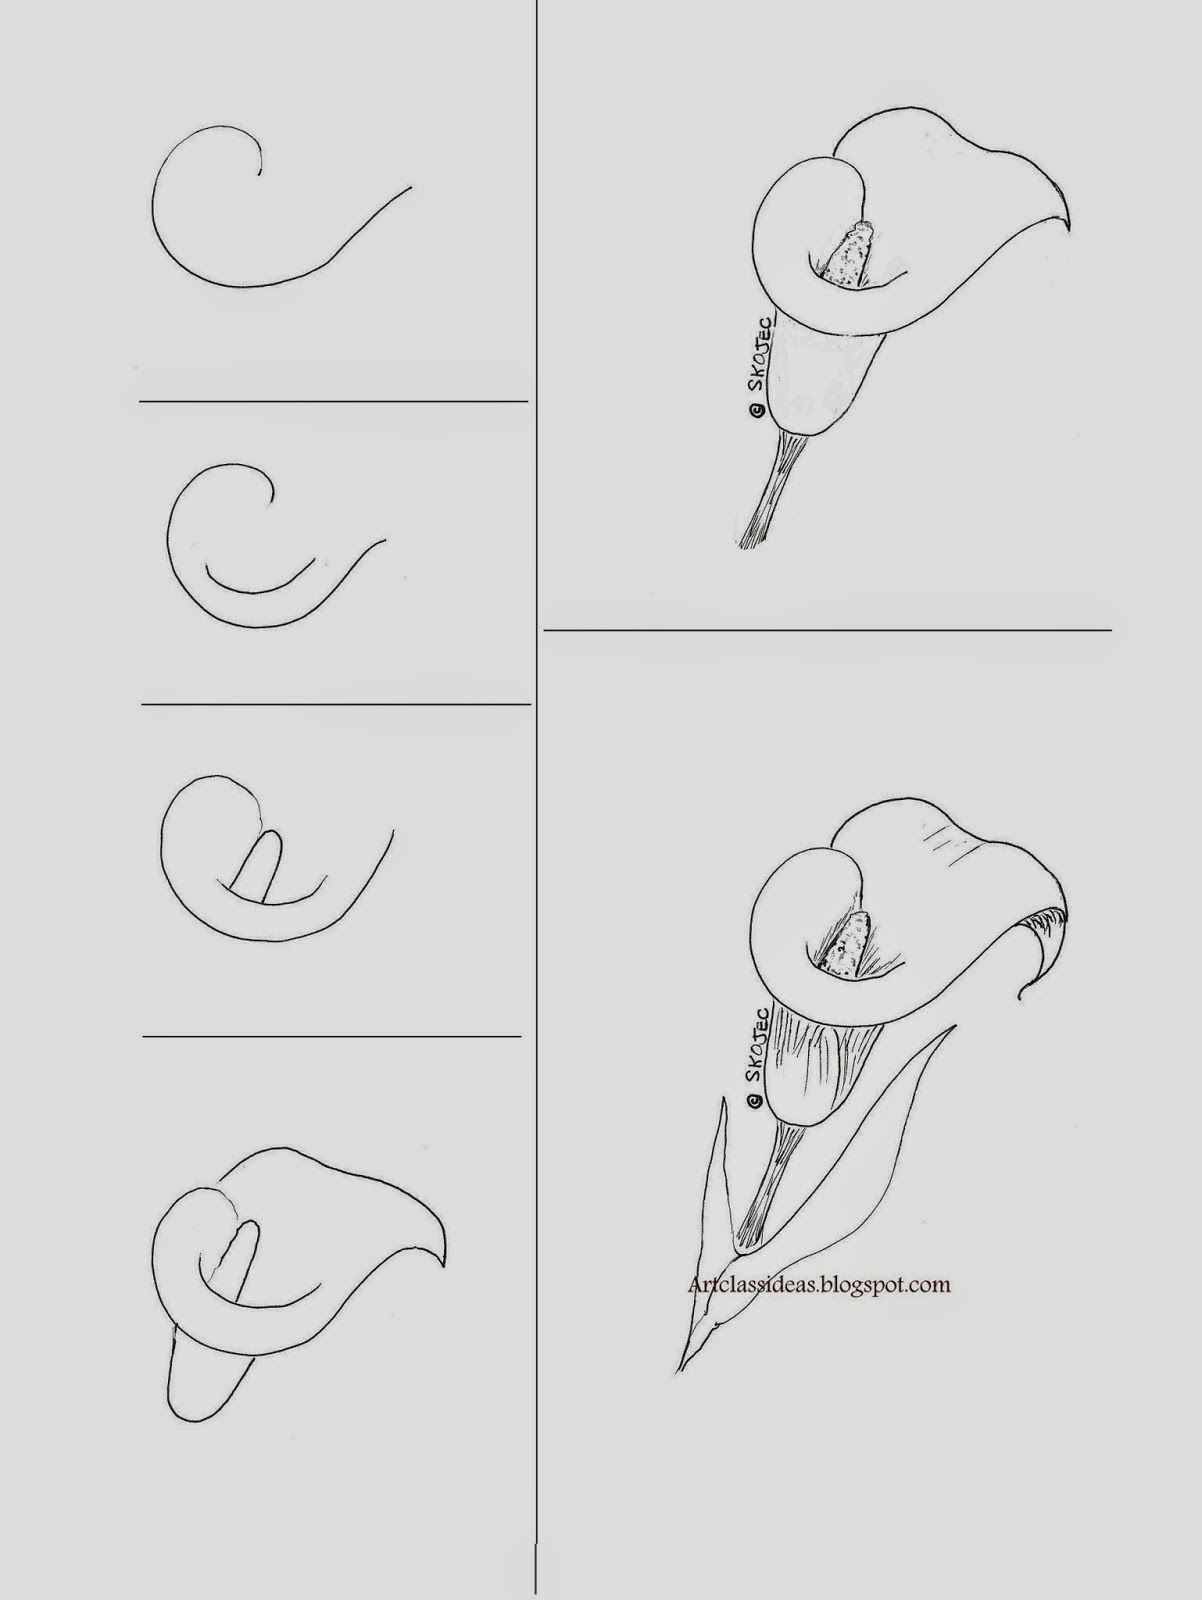 Easy Steps to Make Drawings Calla Lily Art Class Ideas Do Od Le Art Drawings